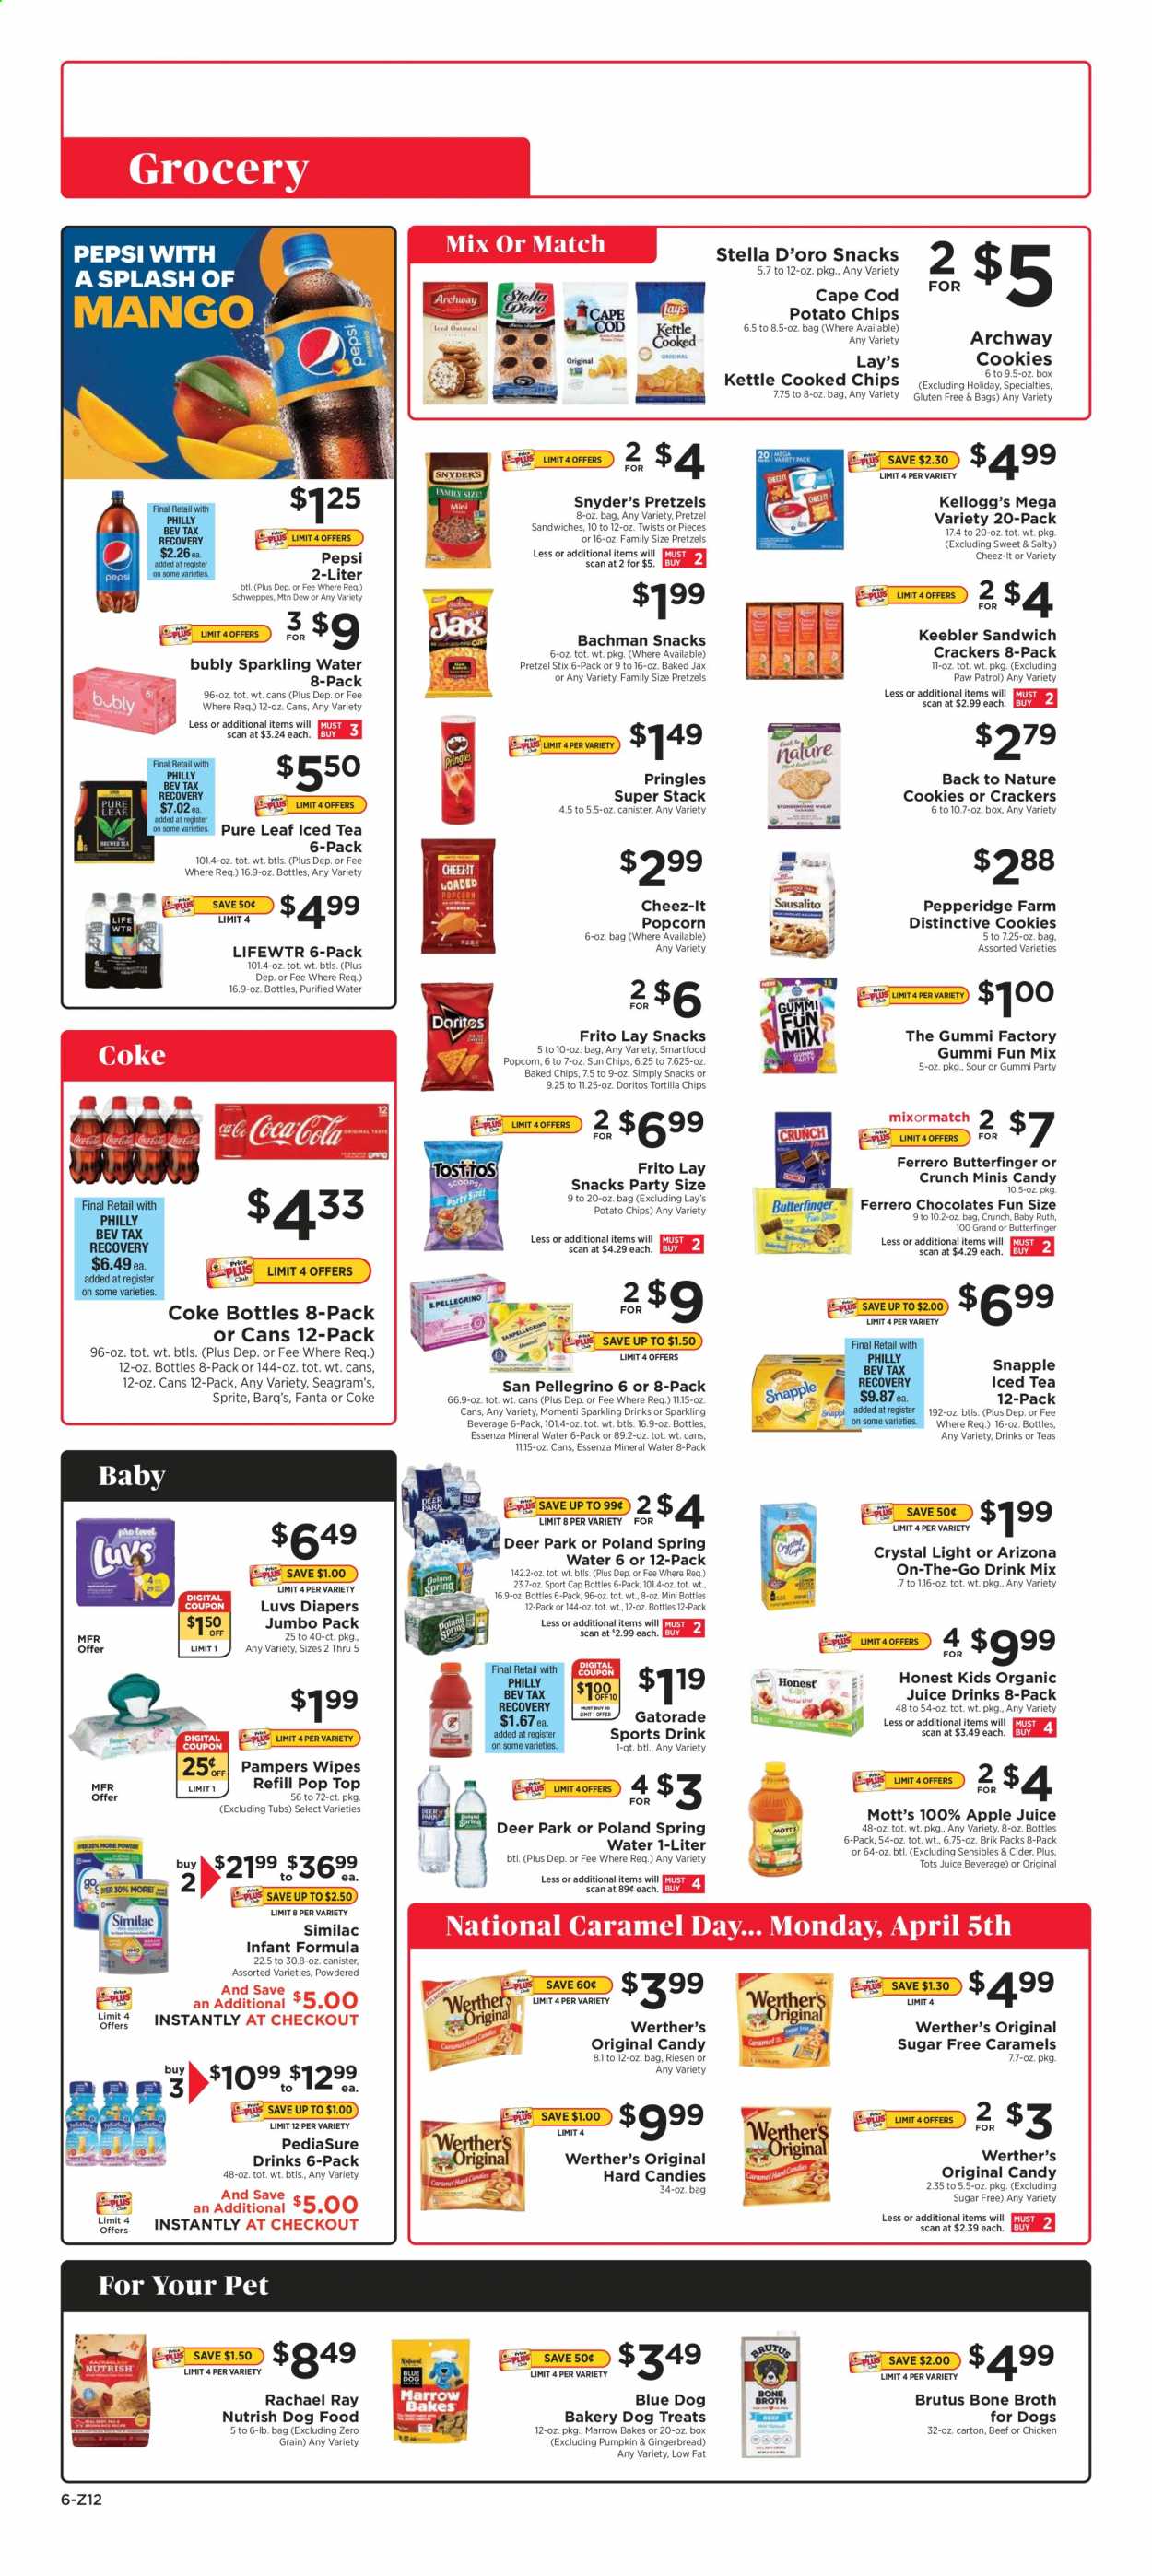 thumbnail - ShopRite Flyer - 04/04/2021 - 04/10/2021 - Sales products - pretzels, gingerbread, cod, cookies, Paw Patrol, chocolate, Ferrero Rocher, crackers, Kellogg's, Keebler, Doritos, tortilla chips, potato chips, Pringles, chips, snack, Lay’s, Smartfood, popcorn, Cheez-It, broth, caramel, apple juice, Coca-Cola, Mountain Dew, Schweppes, Sprite, Pepsi, juice, Fanta, AriZona, Snapple, Mott's, Gatorade, mineral water, spring water, sparkling water, purified water, Lifewtr, Pure Leaf, apple cider, Similac, Pampers, wipes, animal food, dog food, Nutrish, pumpkin. Page 6.